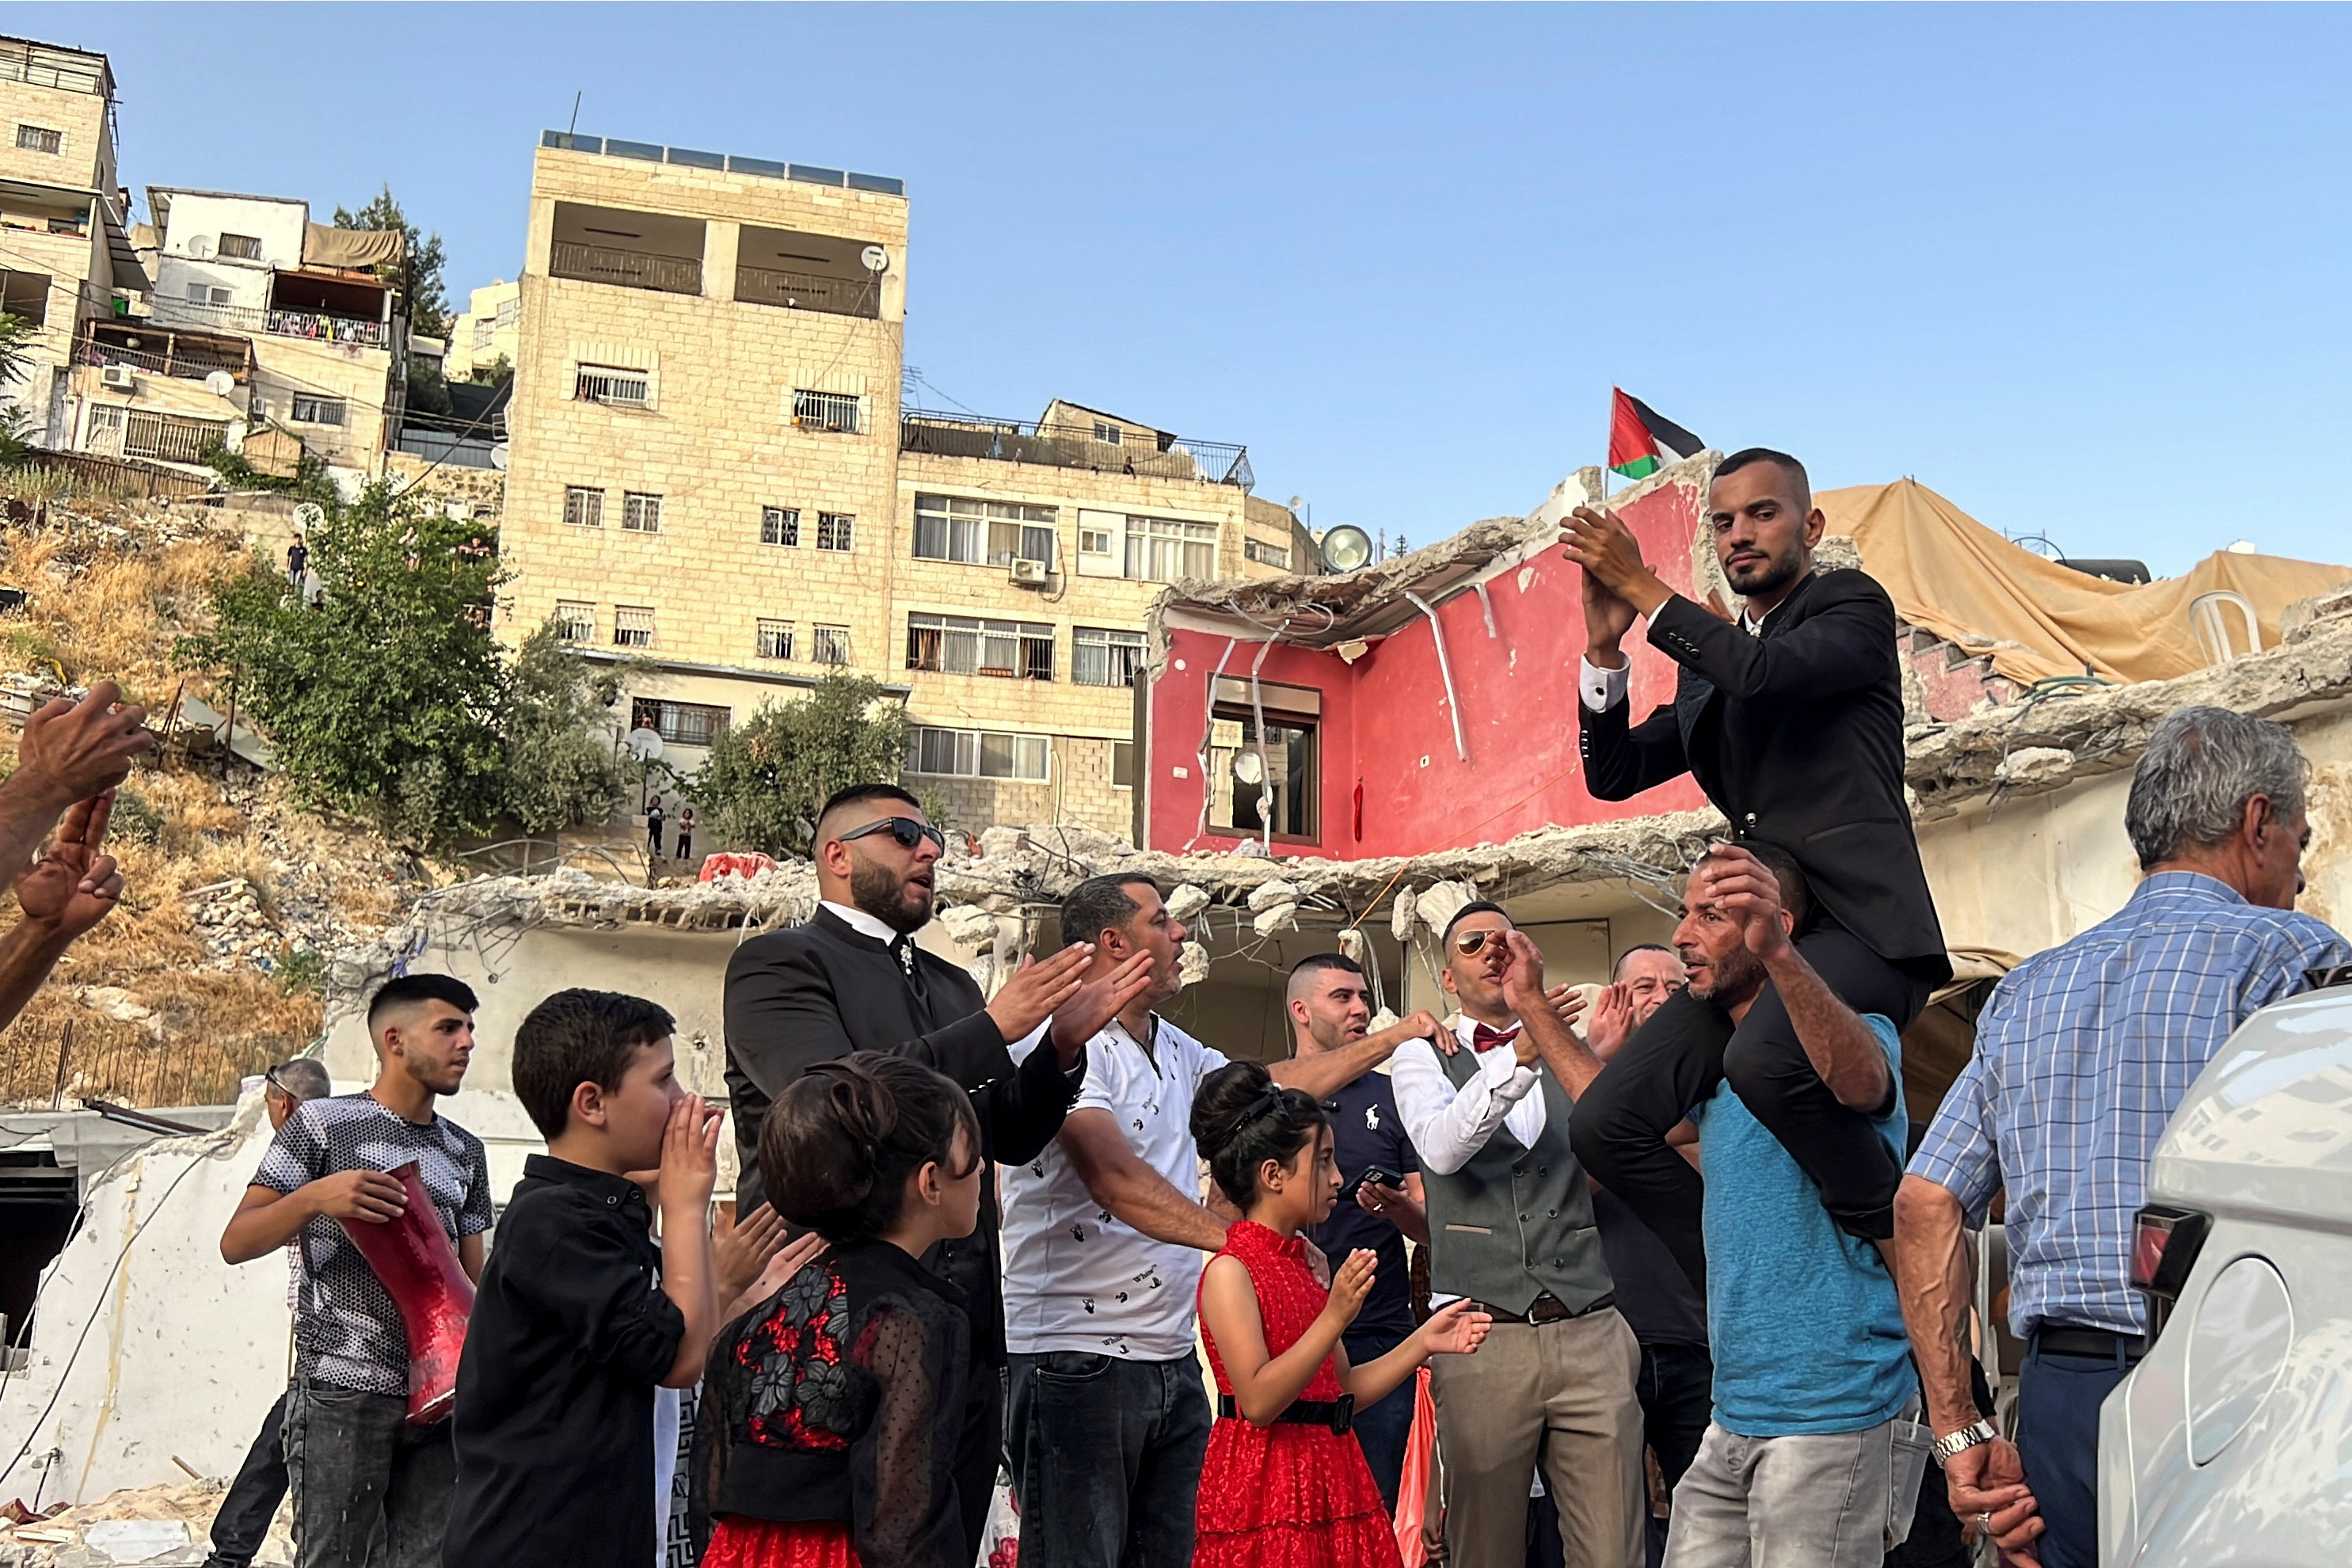 The groom of a Palestinian bride Rabeha Al-Rajabi, celebrates together with friends and family during a pre-wedding ceremony at Al-Rajabi house, that was partly demolished by Israel authority, in East Jerusalem